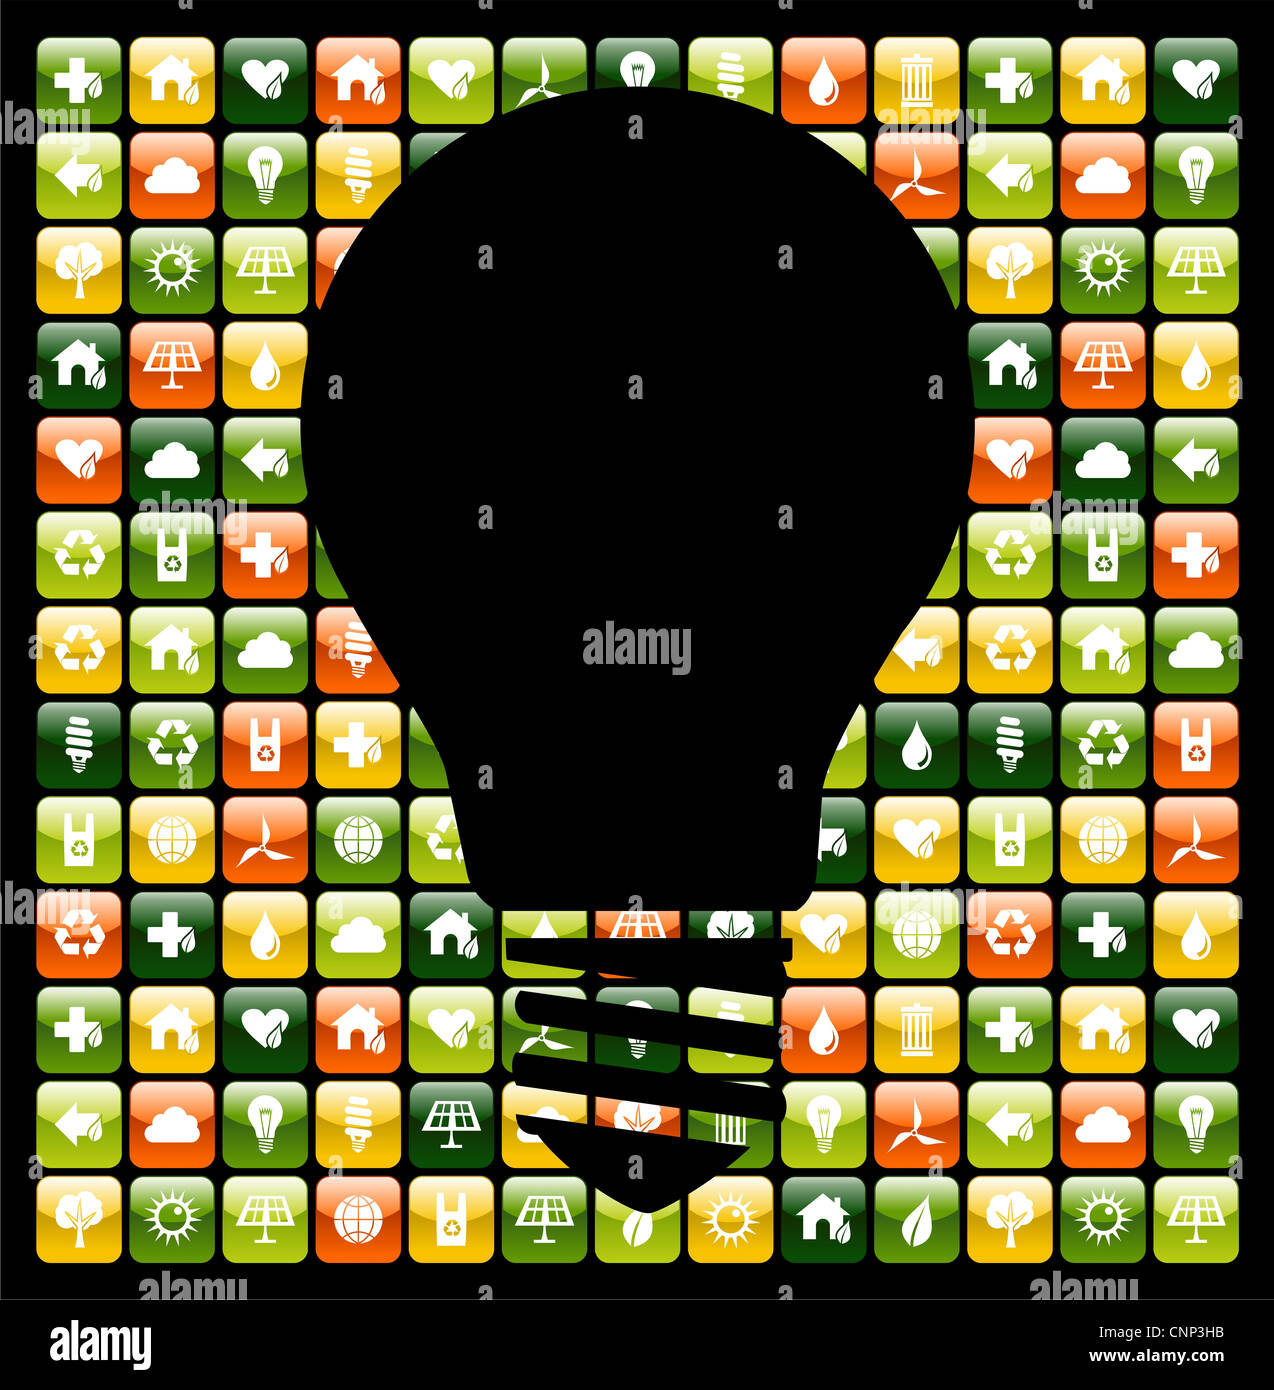 Light bulb symbol over global mobile phone green apps icon background. Vector file available. Stock Photo